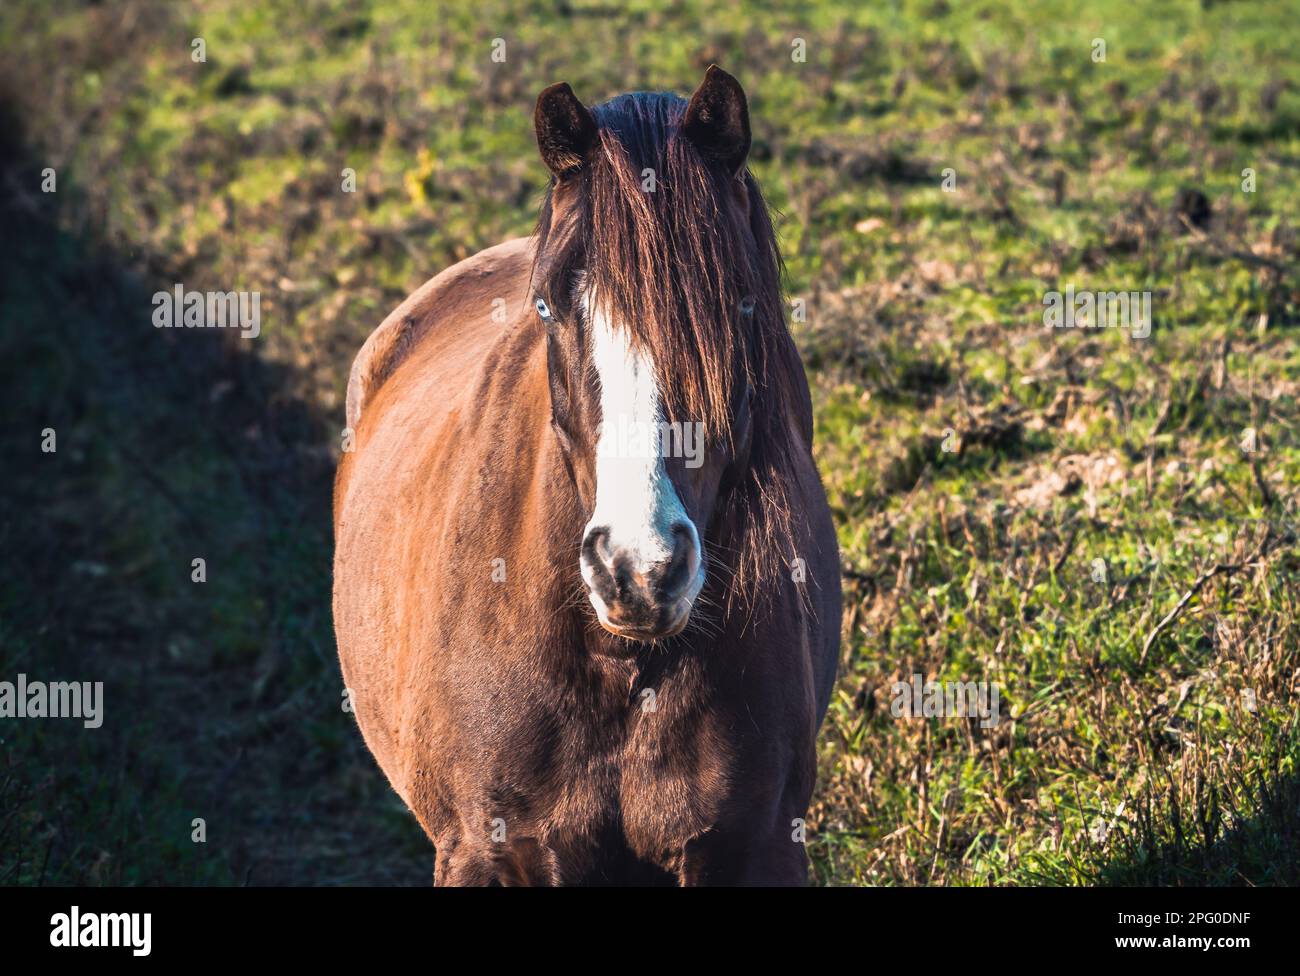 A brown horse in the middle of a pasture facing the camera. A horse with blue-blue eyes and bangs blowing in the morning wind, in the glow of the morn Stock Photo